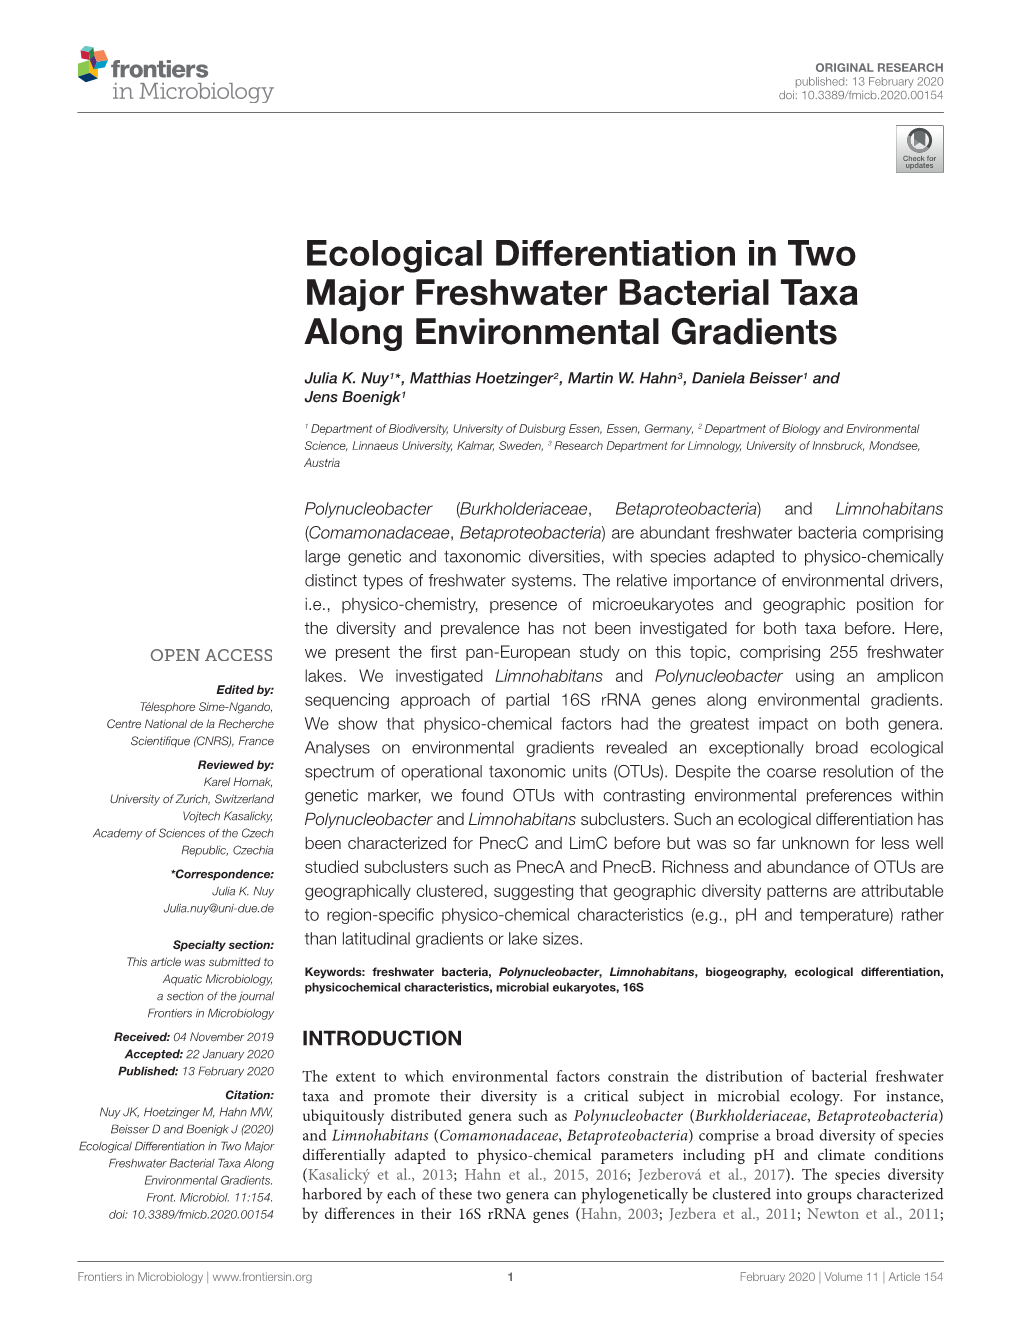 Ecological Differentiation in Two Major Freshwater Bacterial Taxa Along Environmental Gradients